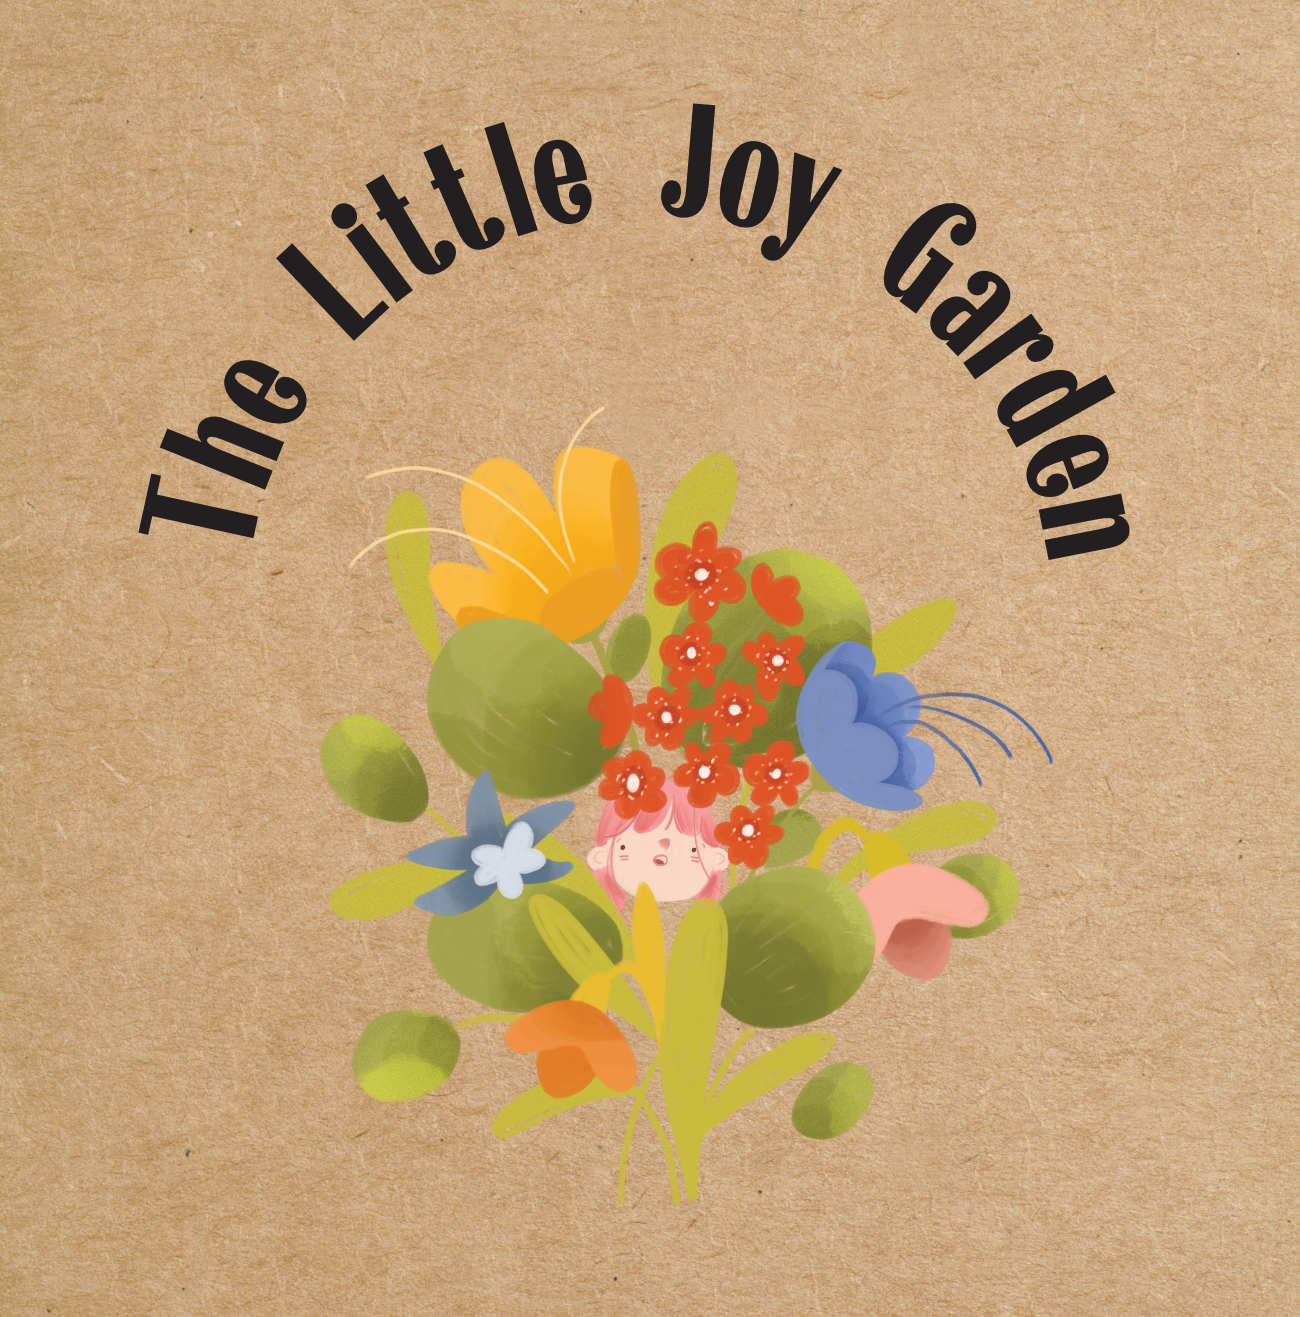 Bedtime stories The Little Joy Garden by Jade Maitre inspirational stories for kids page 2